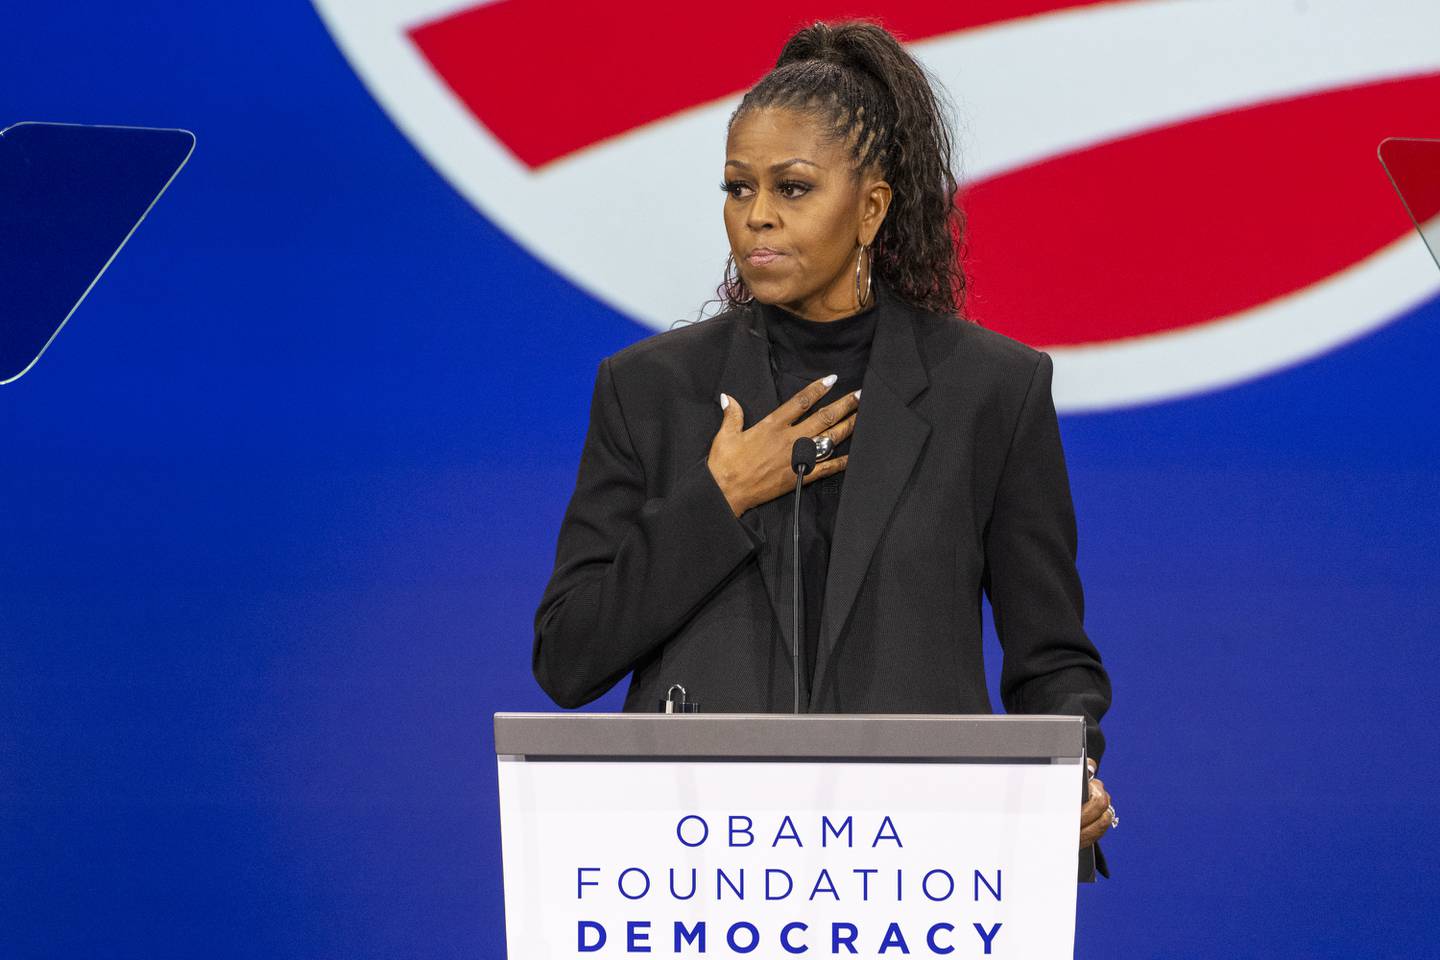 Former first lady Michelle Obama speaks during the Obama Foundation Democracy Forum at McCormick Place, Friday, Nov. 3, 2023 in Chicago. (Tyler Pasciak LaRiviere/Chicago Sun-Times via AP)